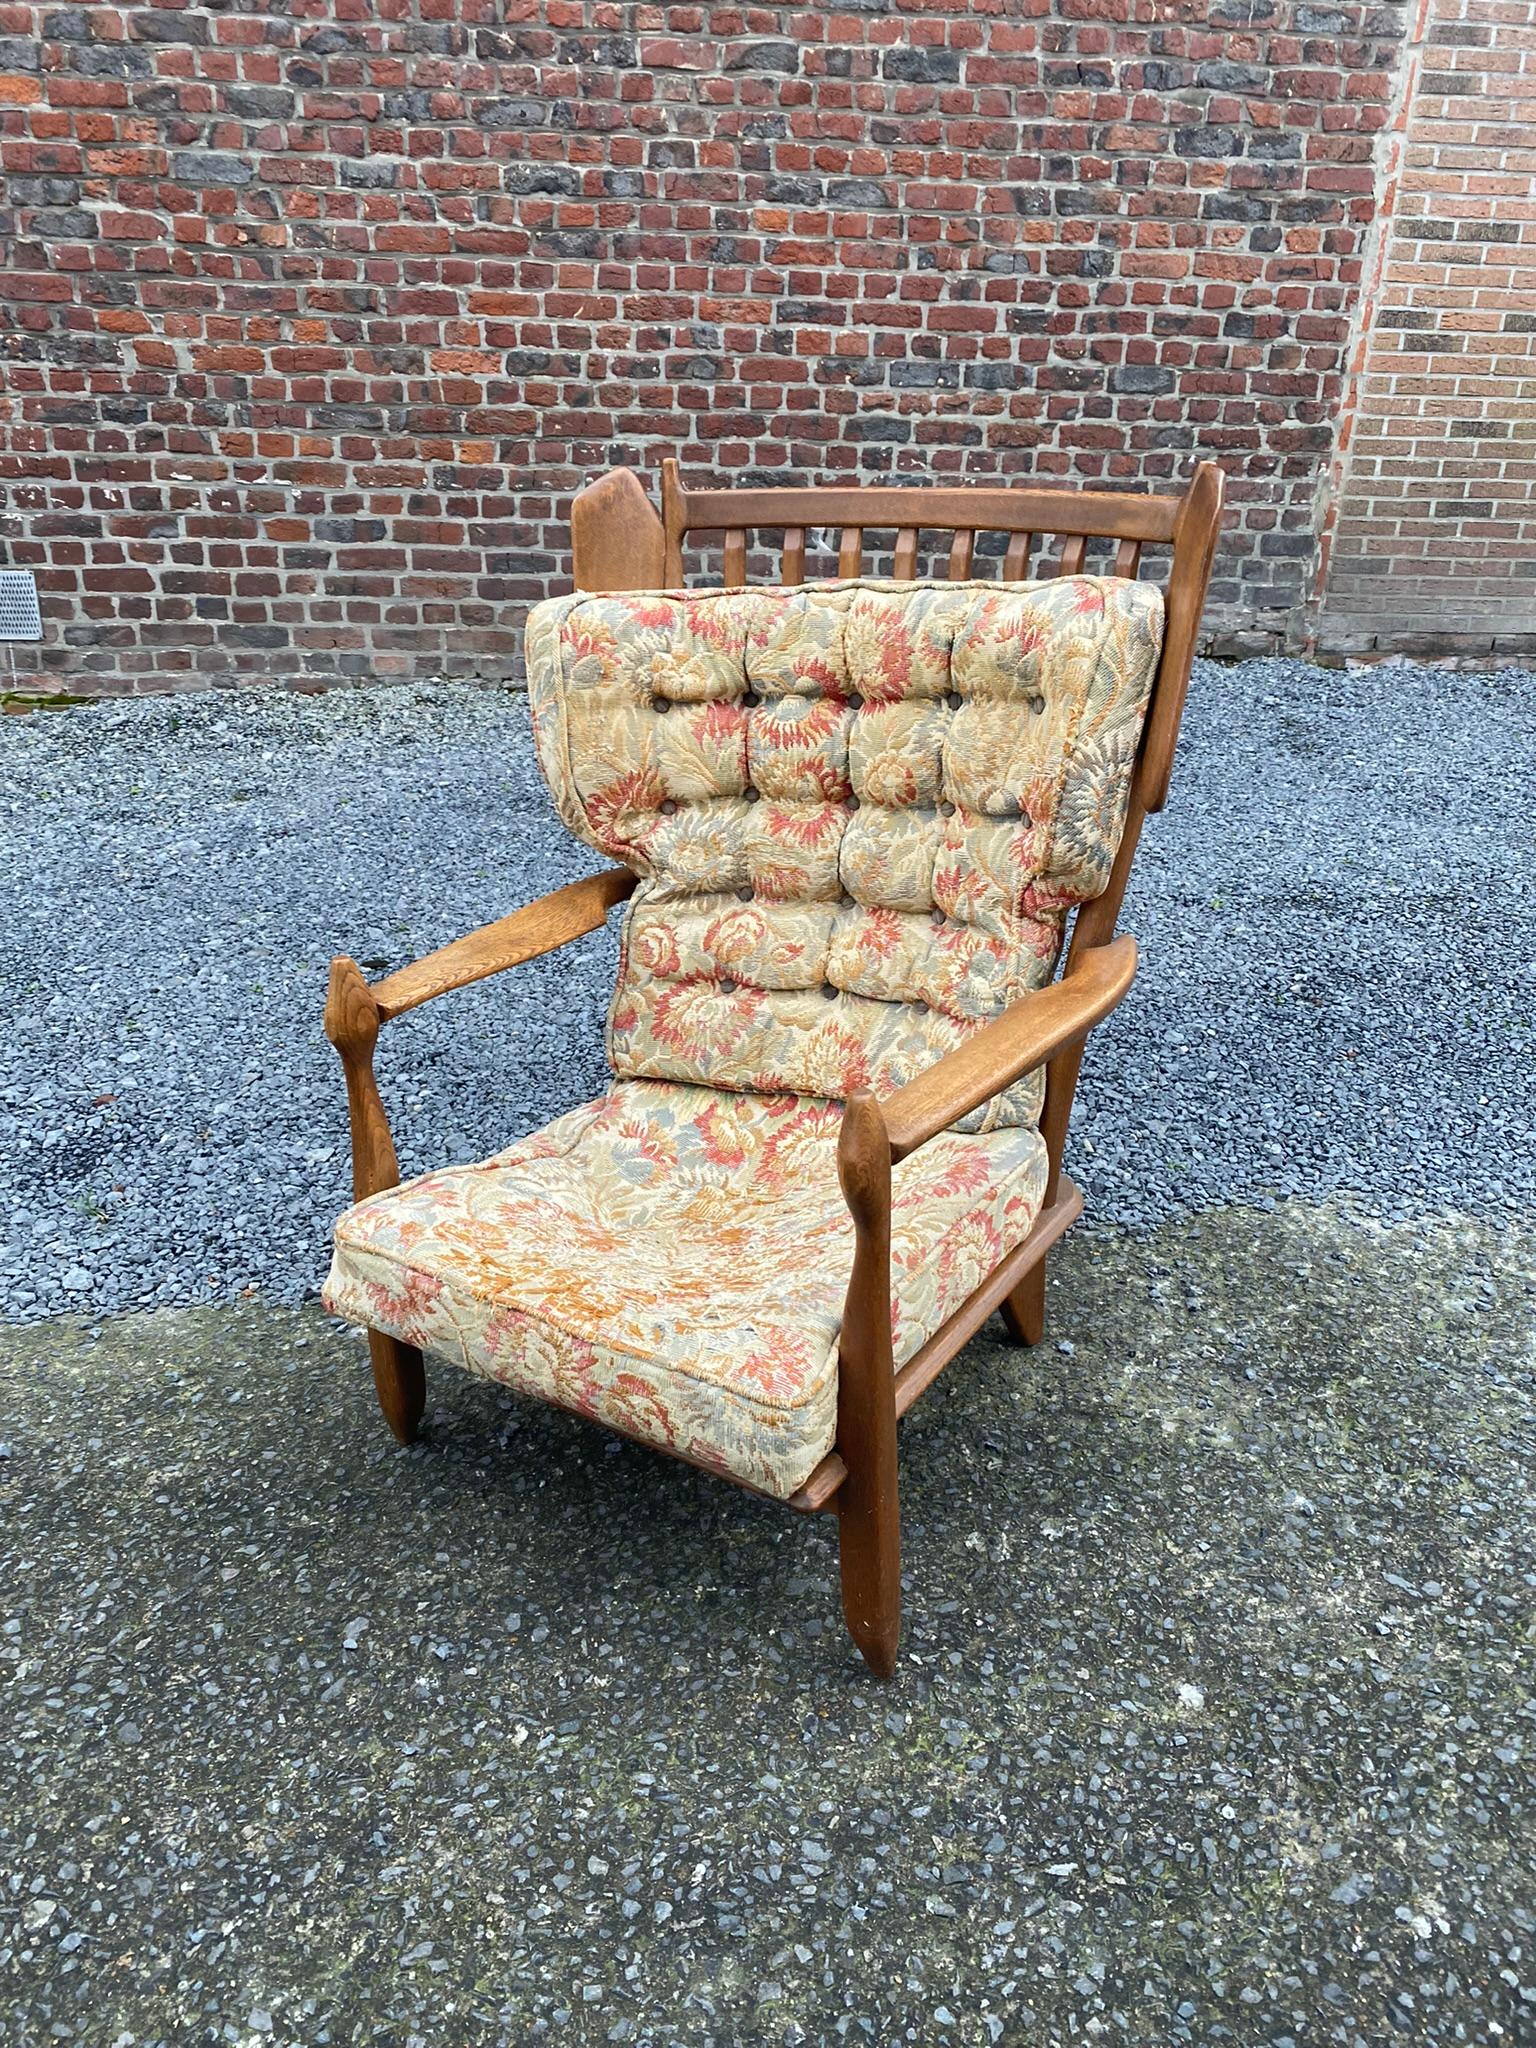 Guillerme et Chambron, oak bergere chair, circa 1960, Edition Votre Maison.
wood in good condition, upholstery and fabric to be changed.